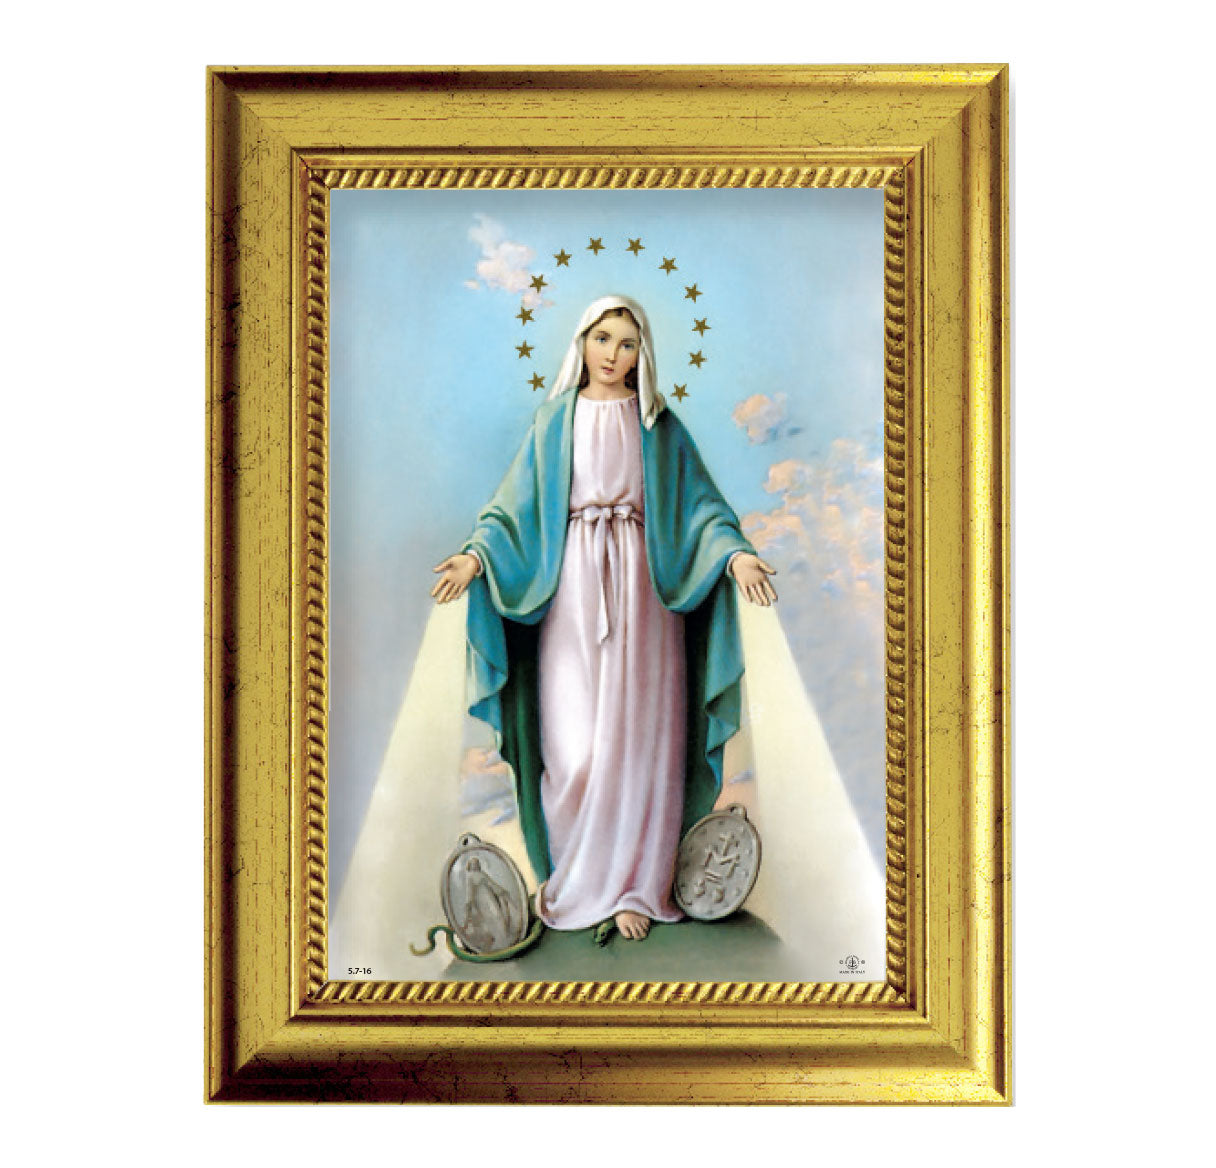 Our Lady of the Miraculous Medal Gold-Leaf Framed Art